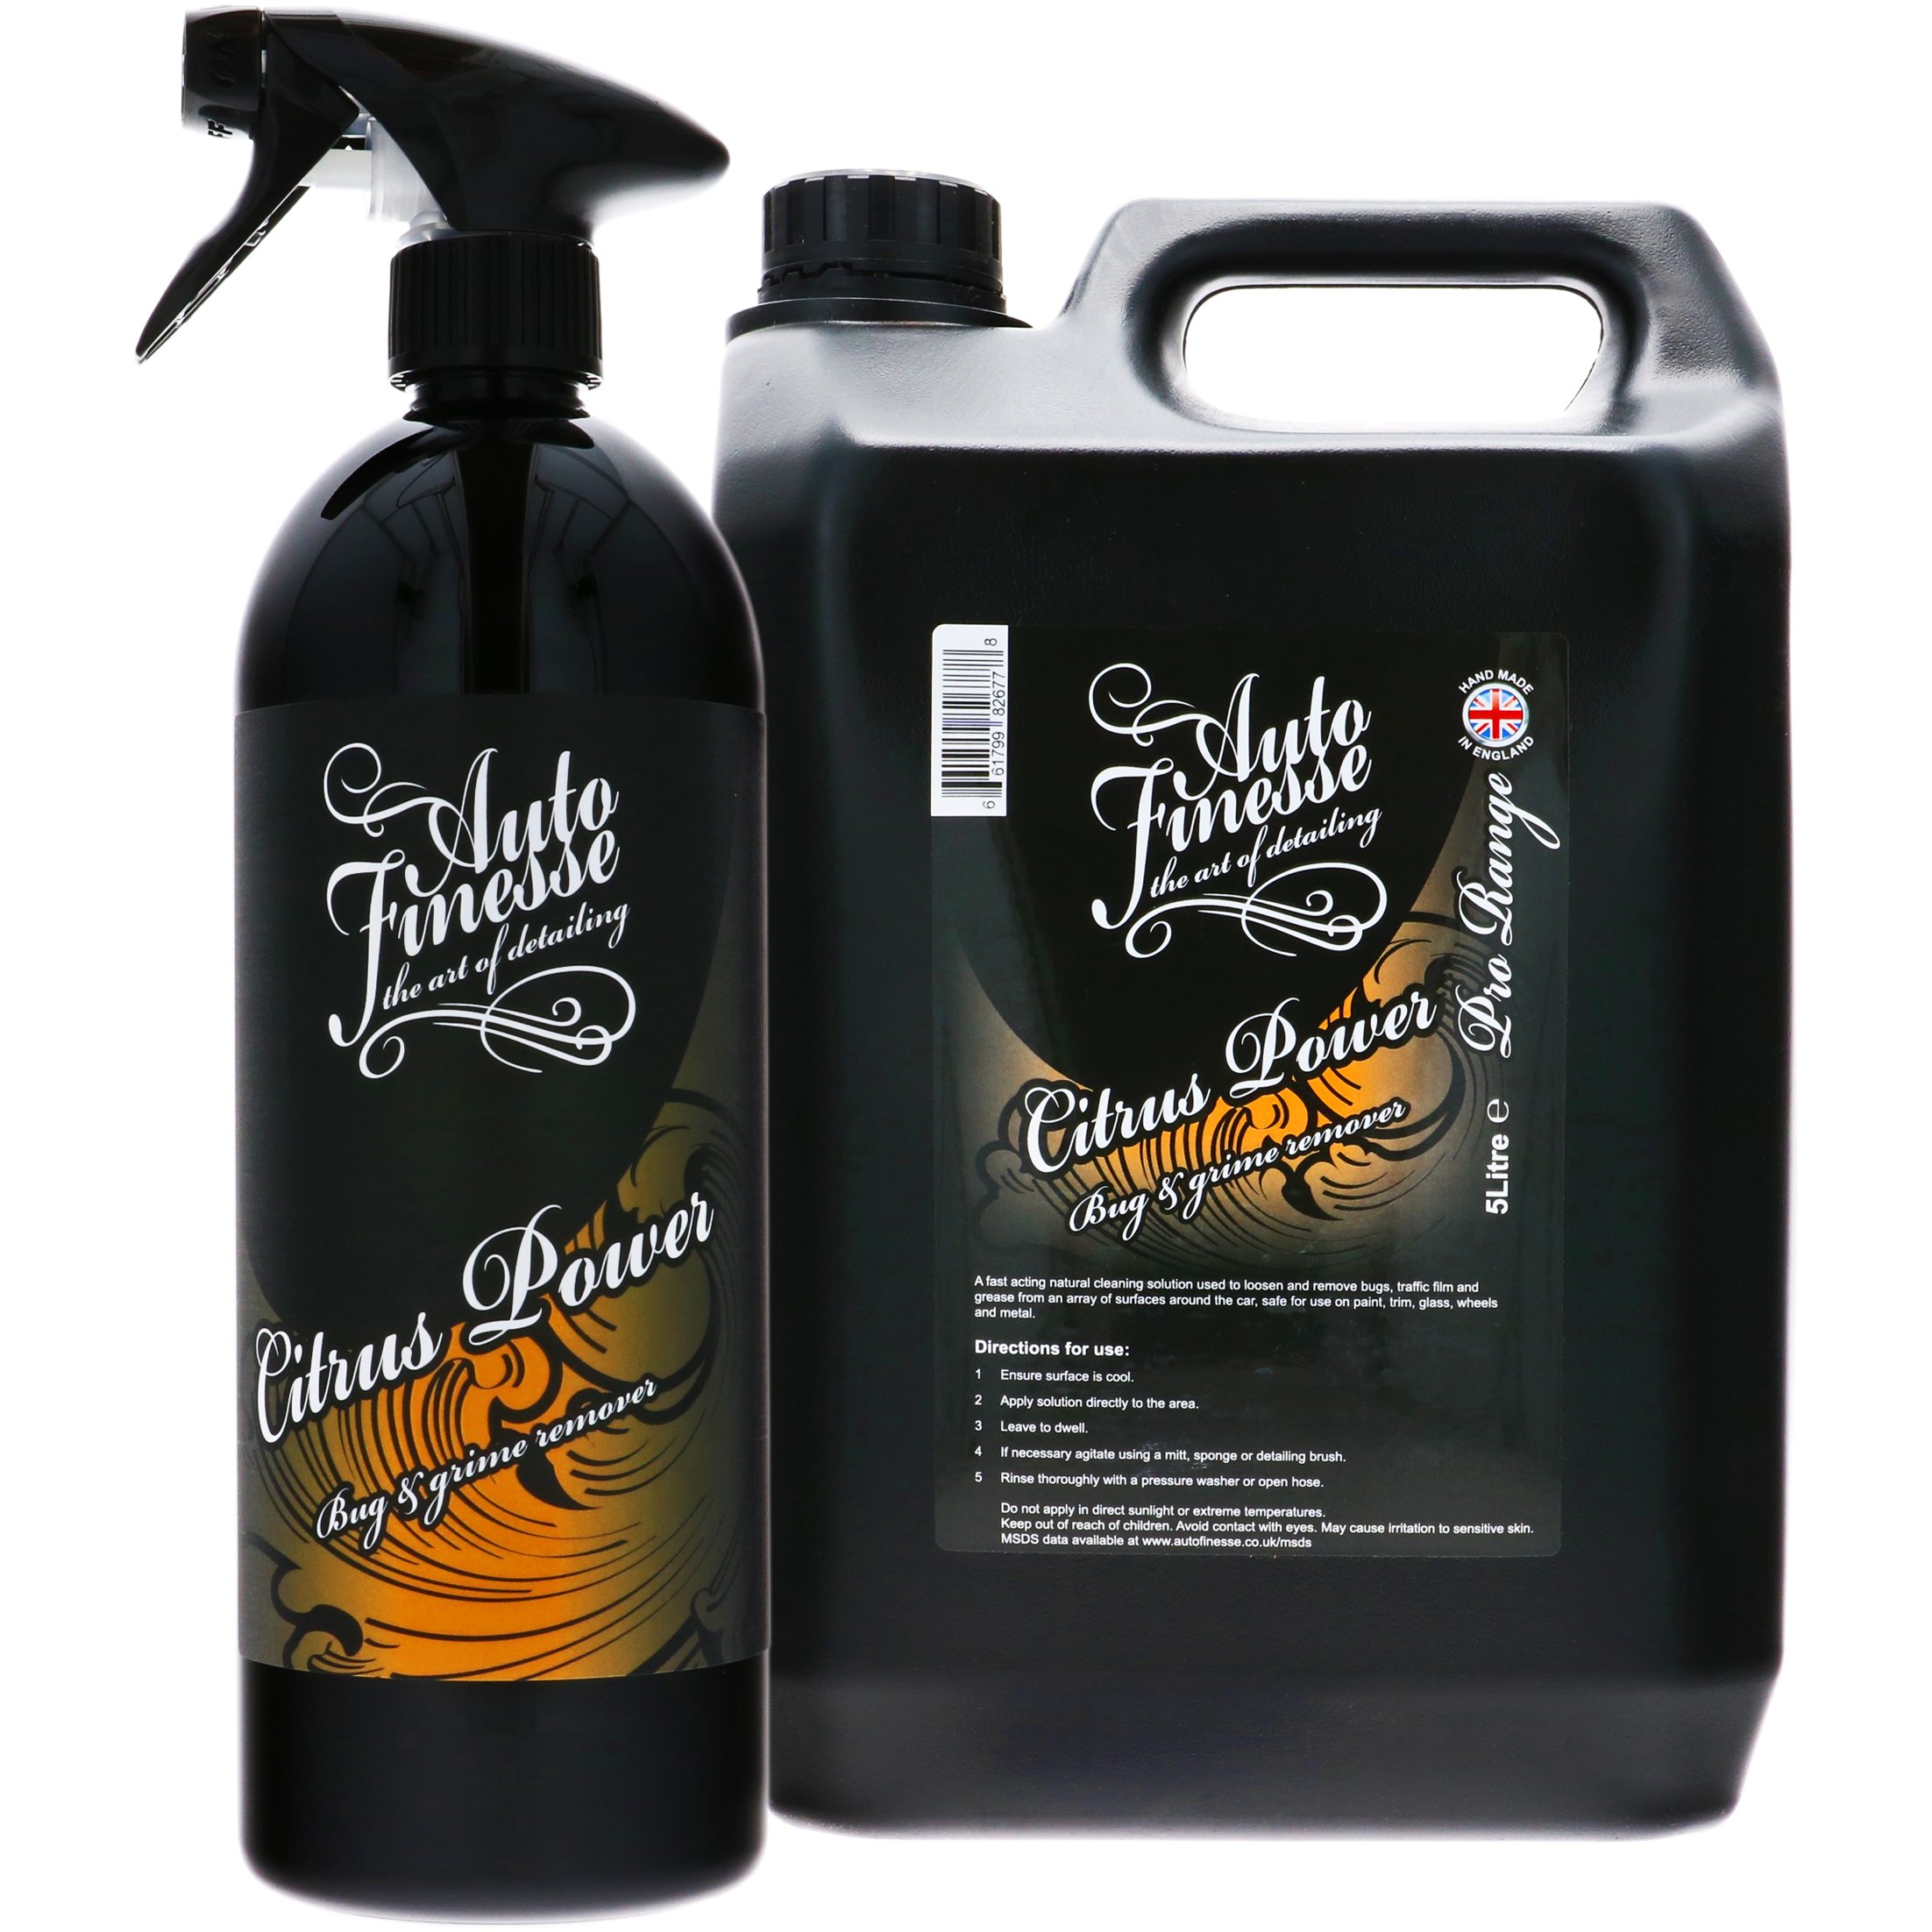 Citrus Power Bug and Grime Remover